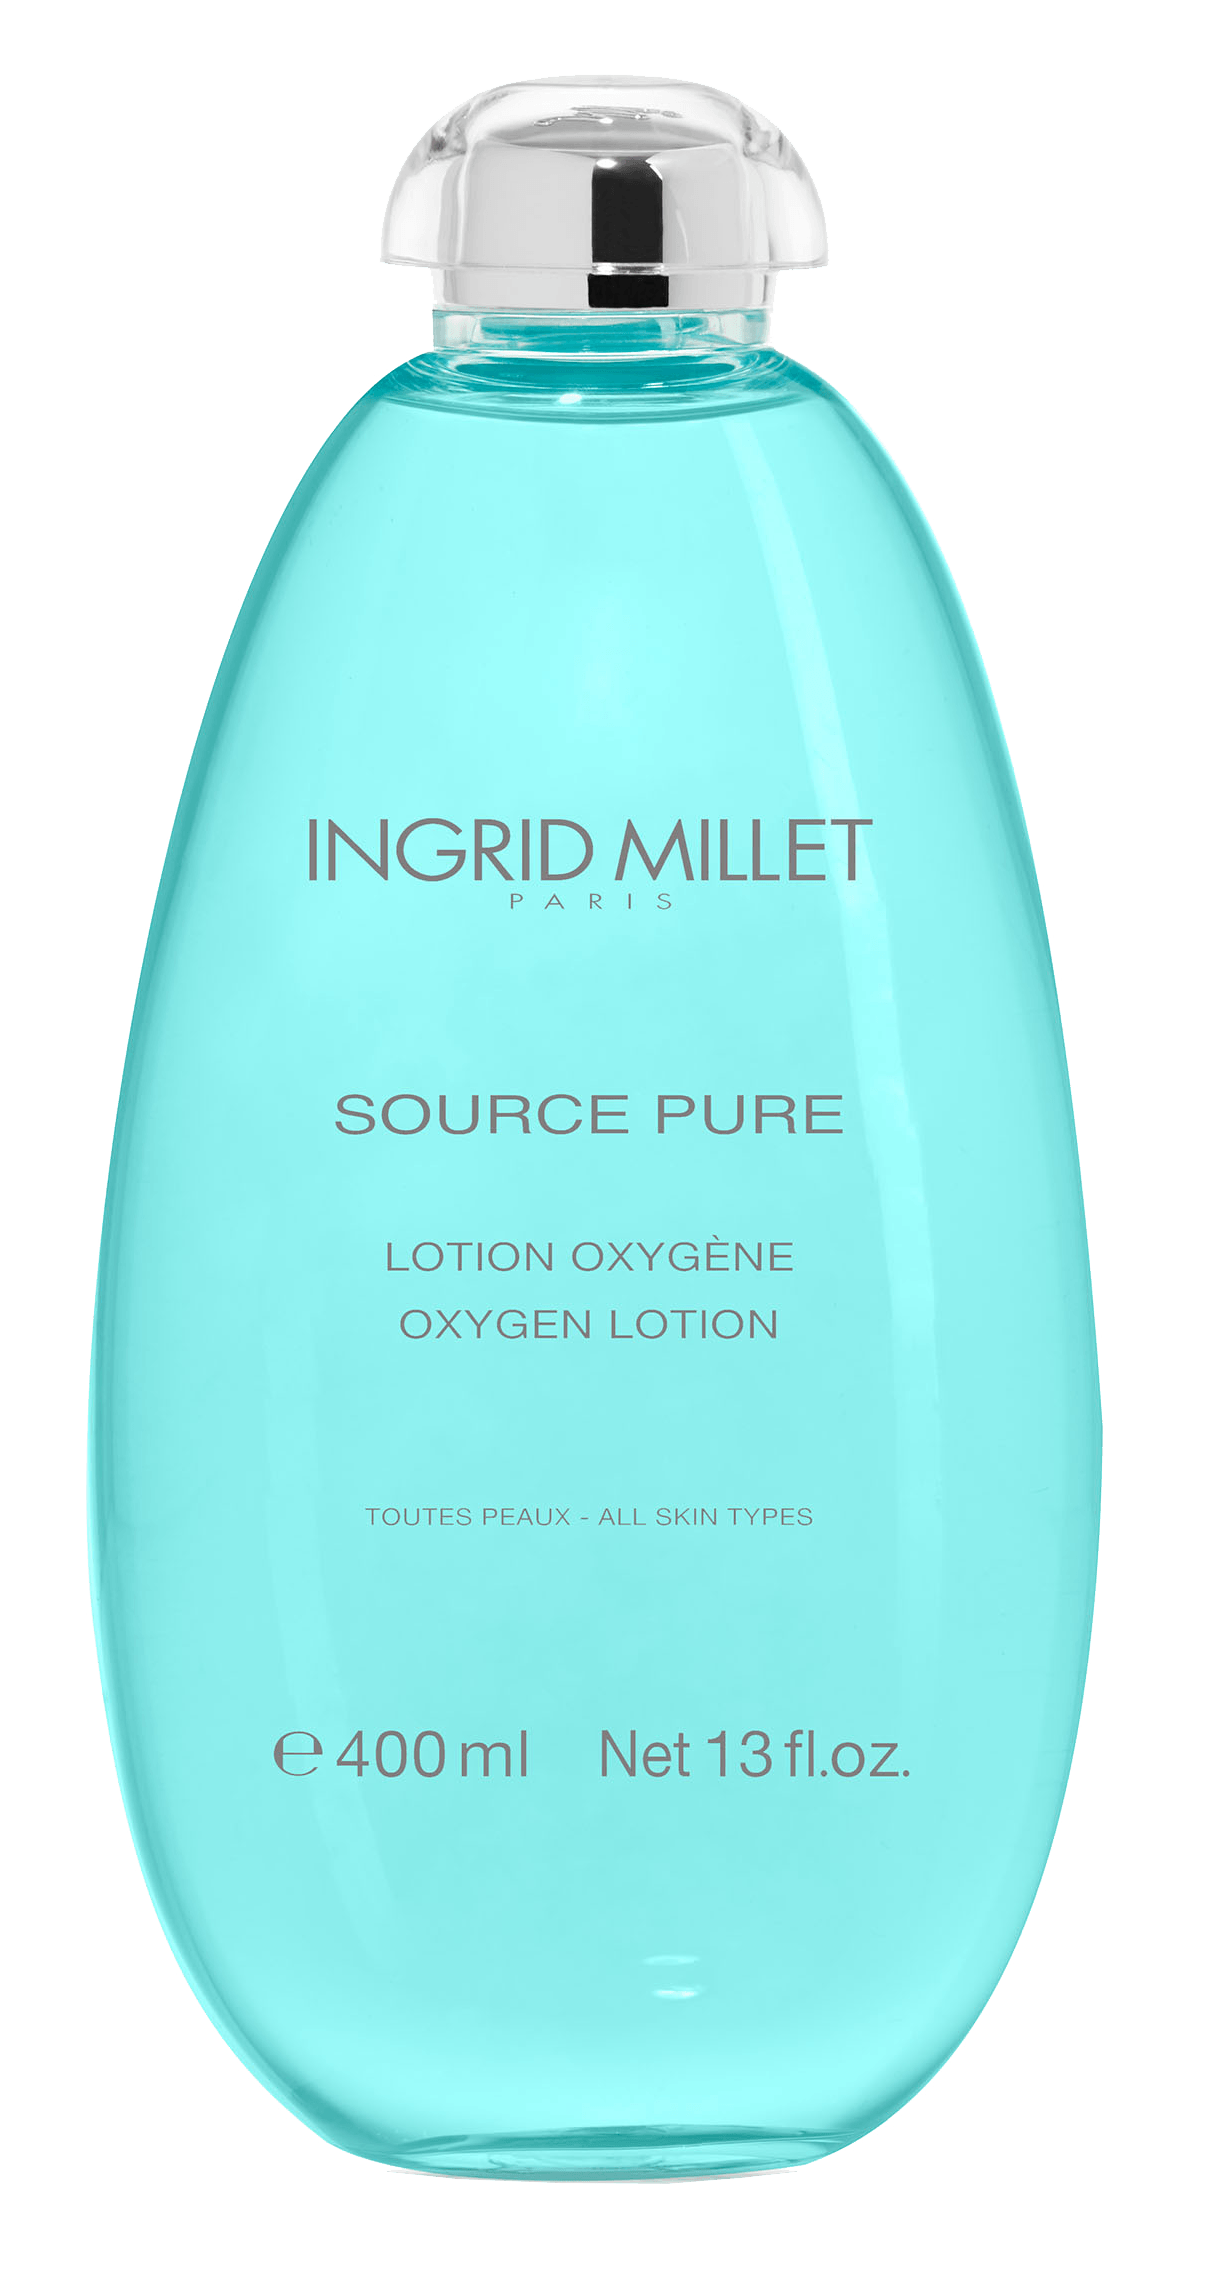 Ingrid Millet Source Pure Cleansing & Lotion Oxygene